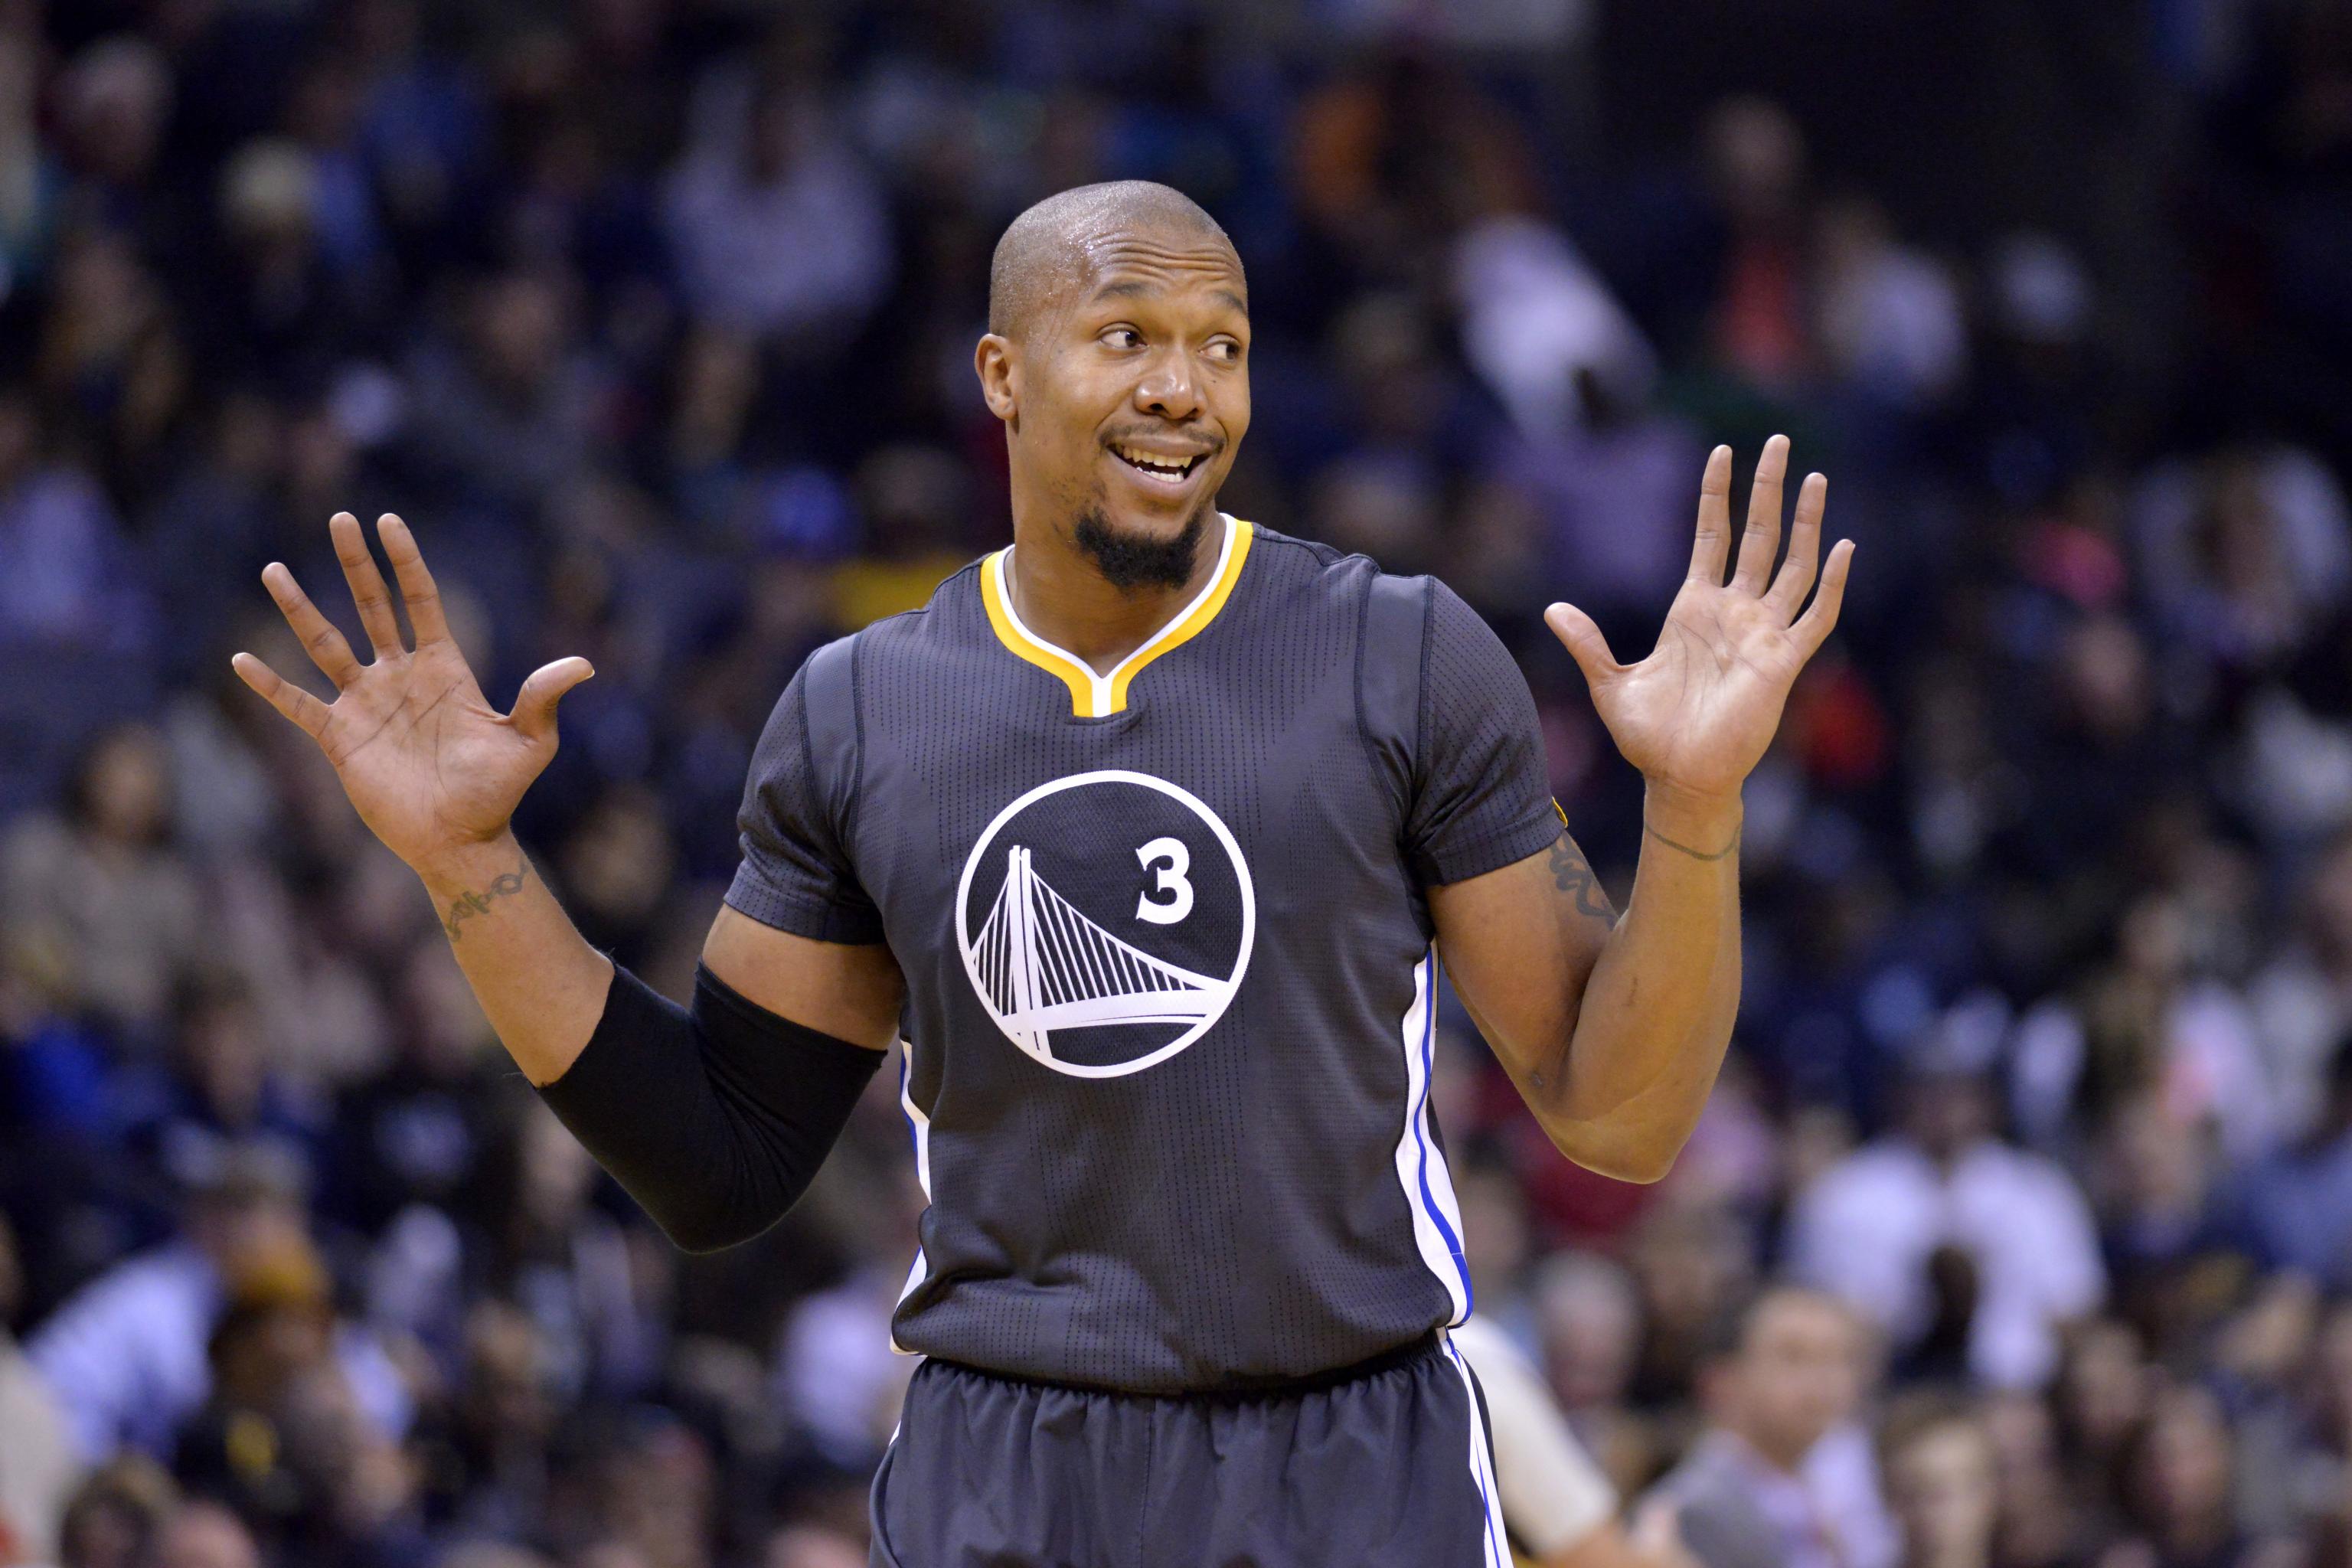 Warriors Talk: David West - 5/12/18, D-West shares his thoughts on the  team's upcoming series with Houston & more after today's practice 🗣, By  Golden State Warriors